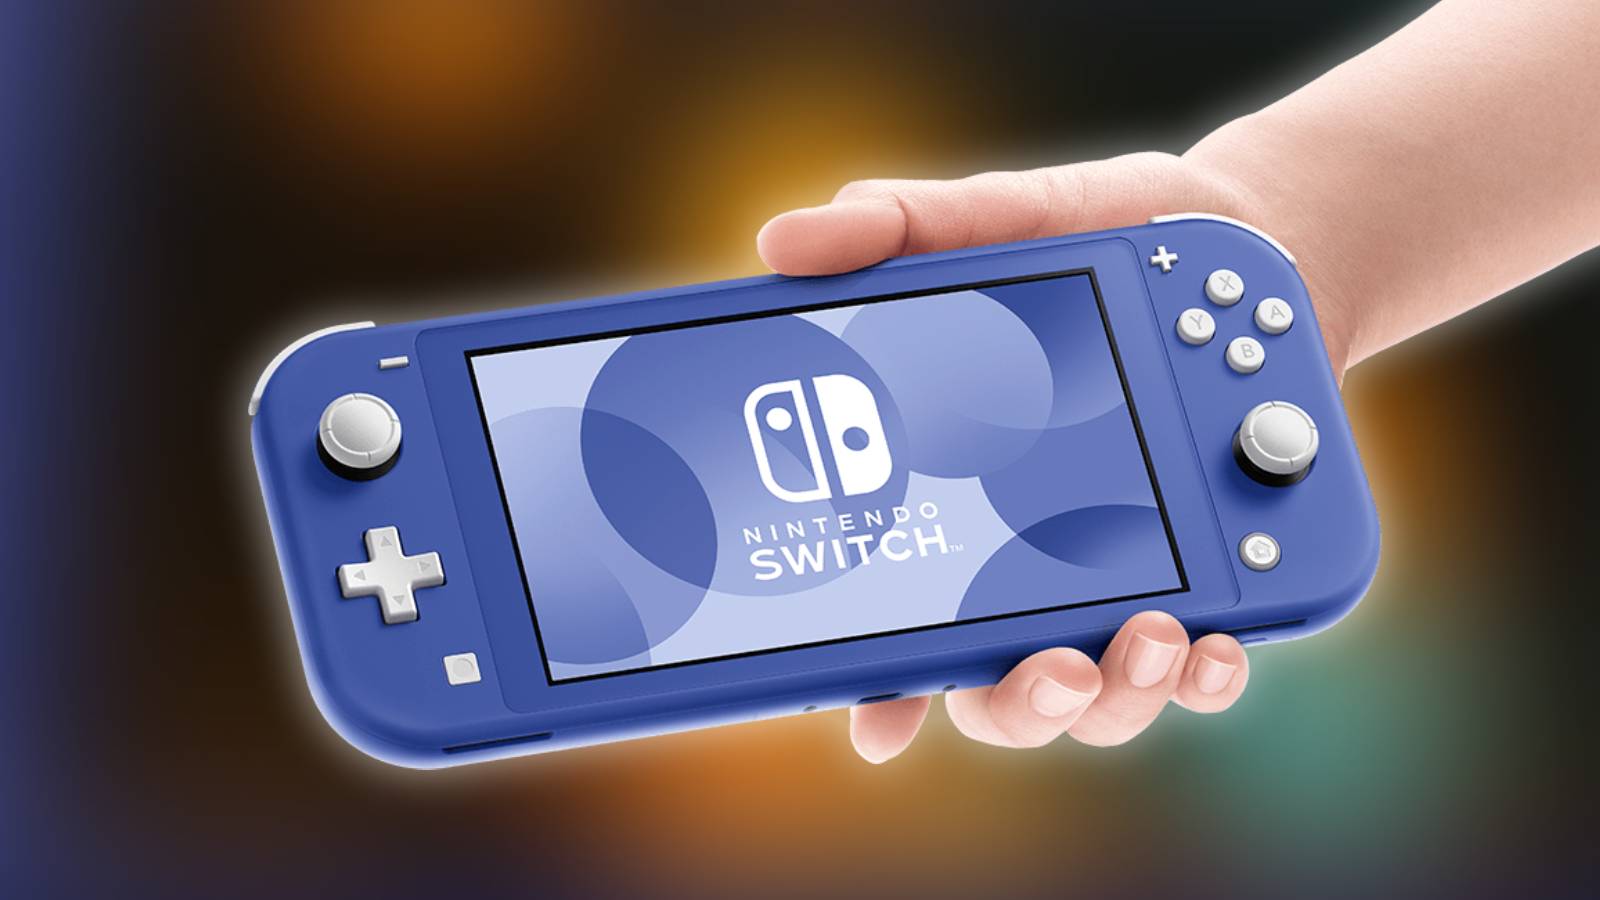 A screenshot from Taki Udon's Switch Lite video blurred in the background with an official Switch Lite image in front.